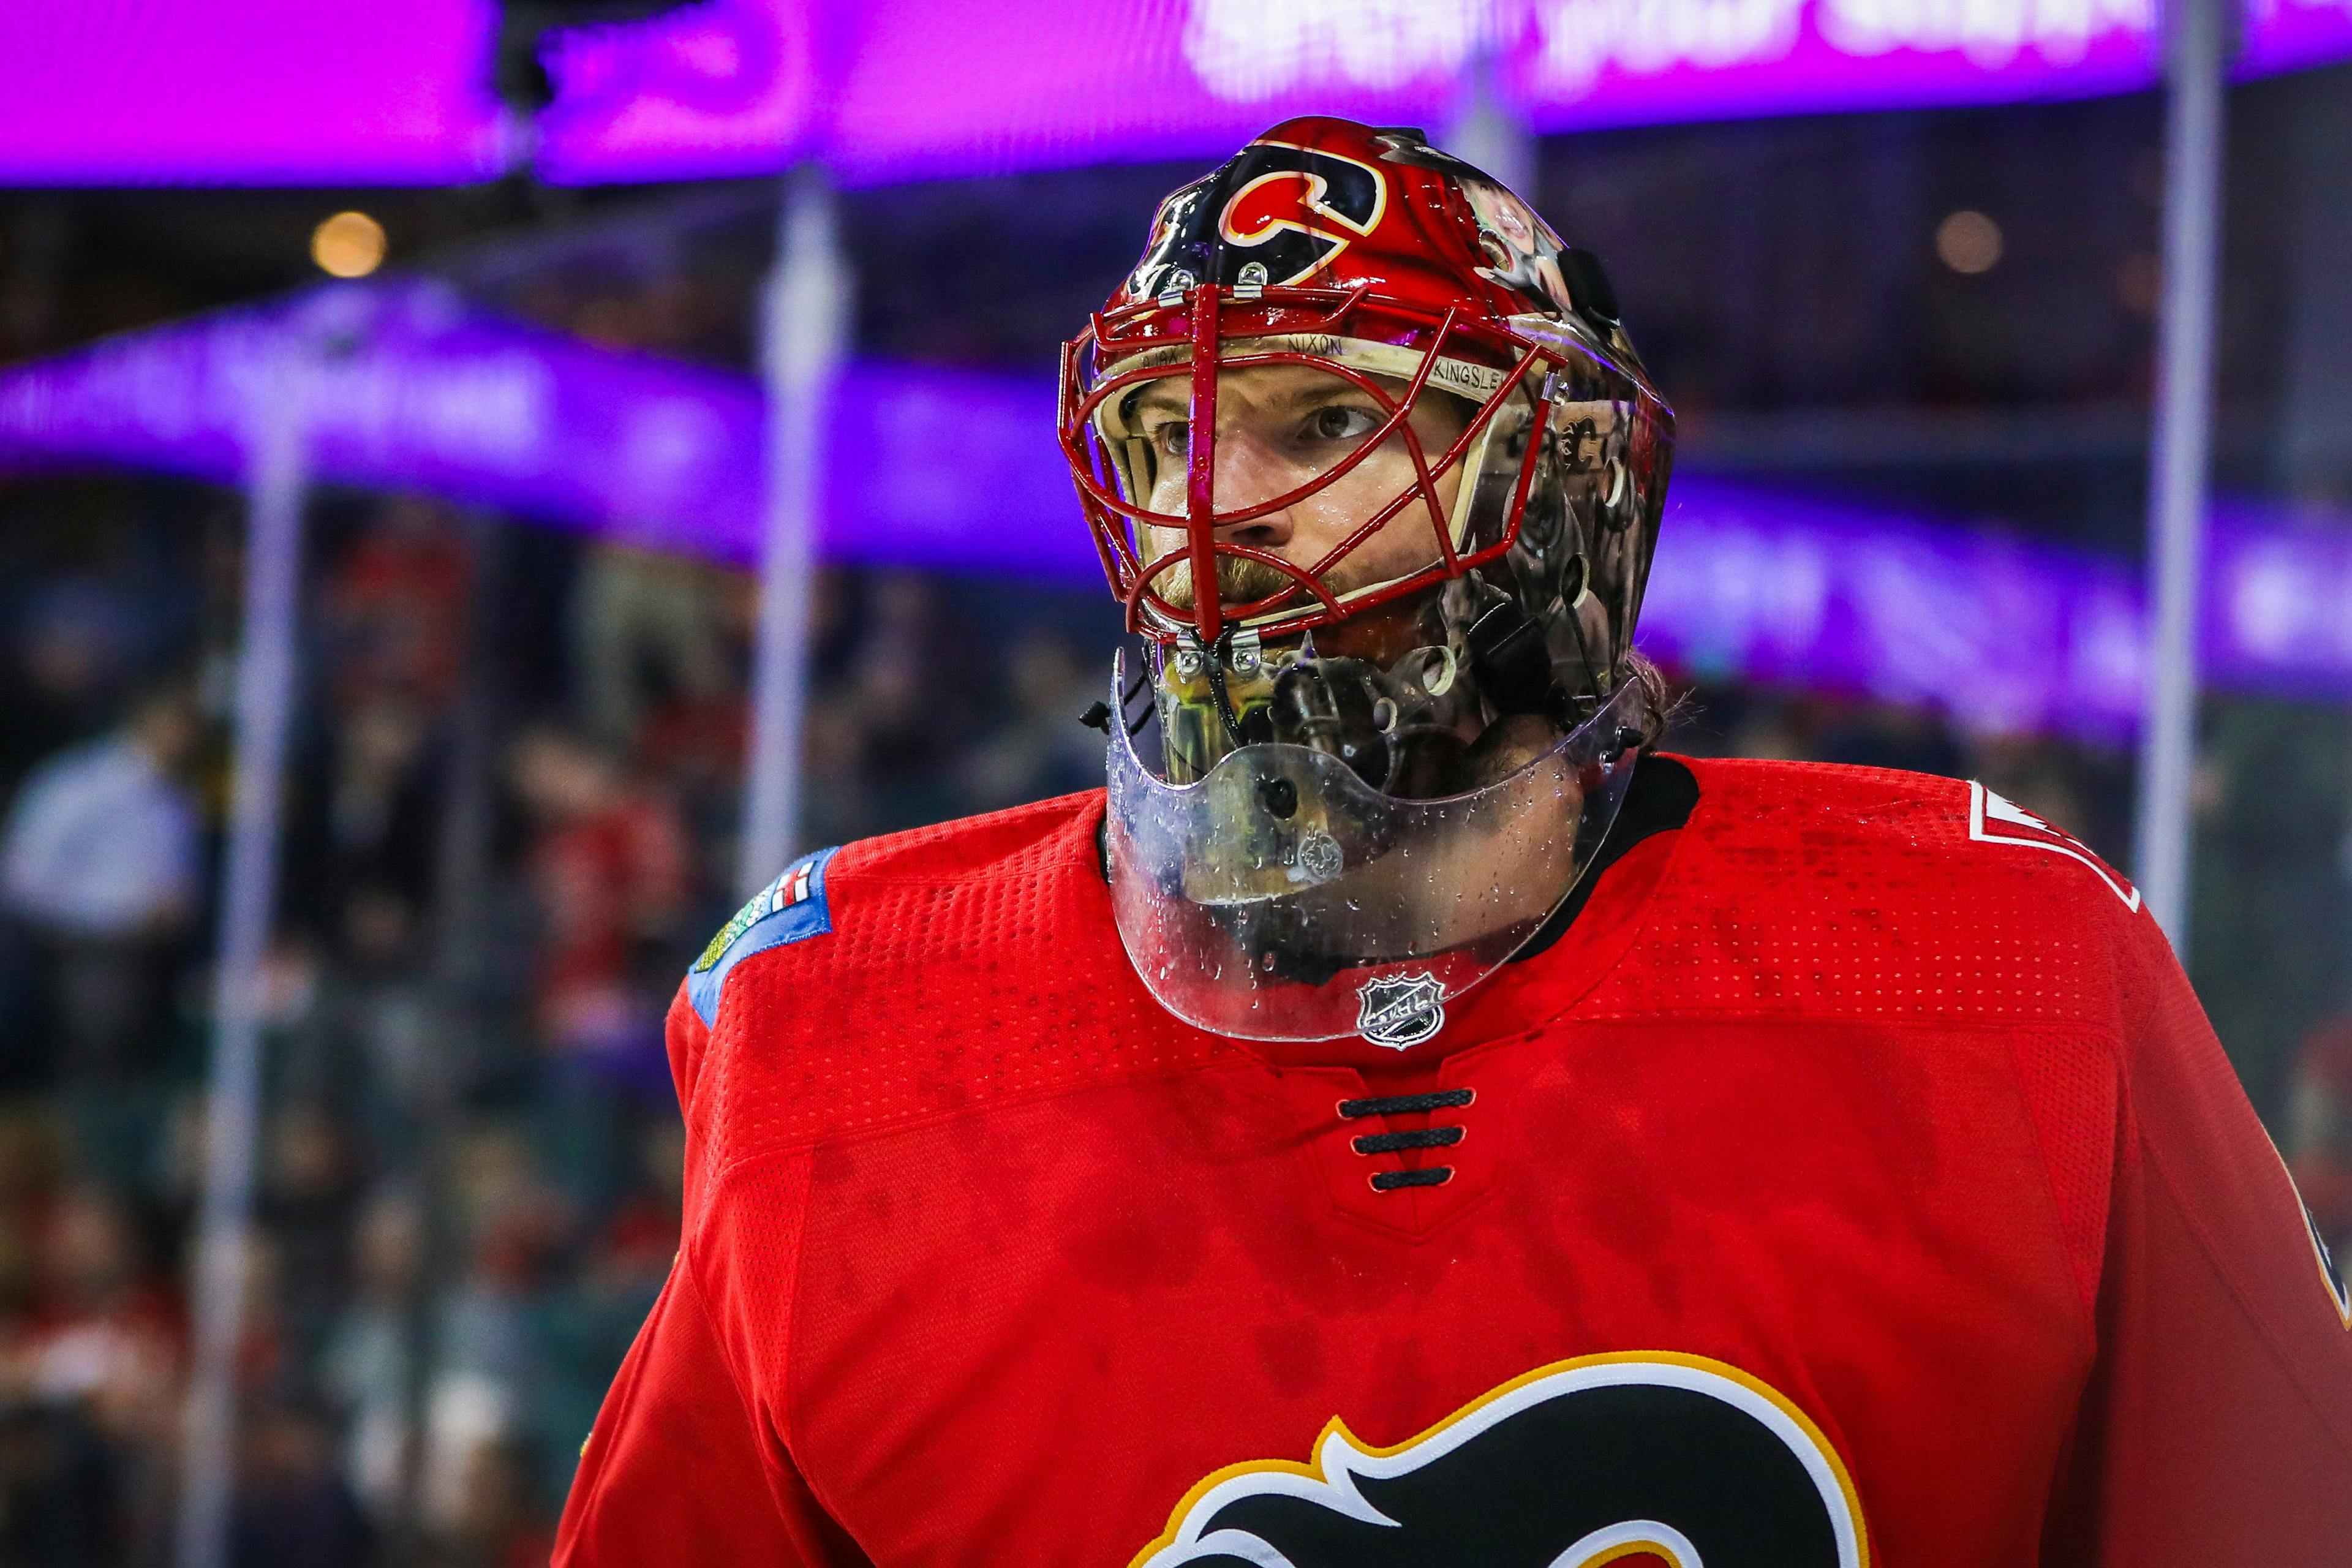 Mike Smith unveils new goalie mask - FlamesNation